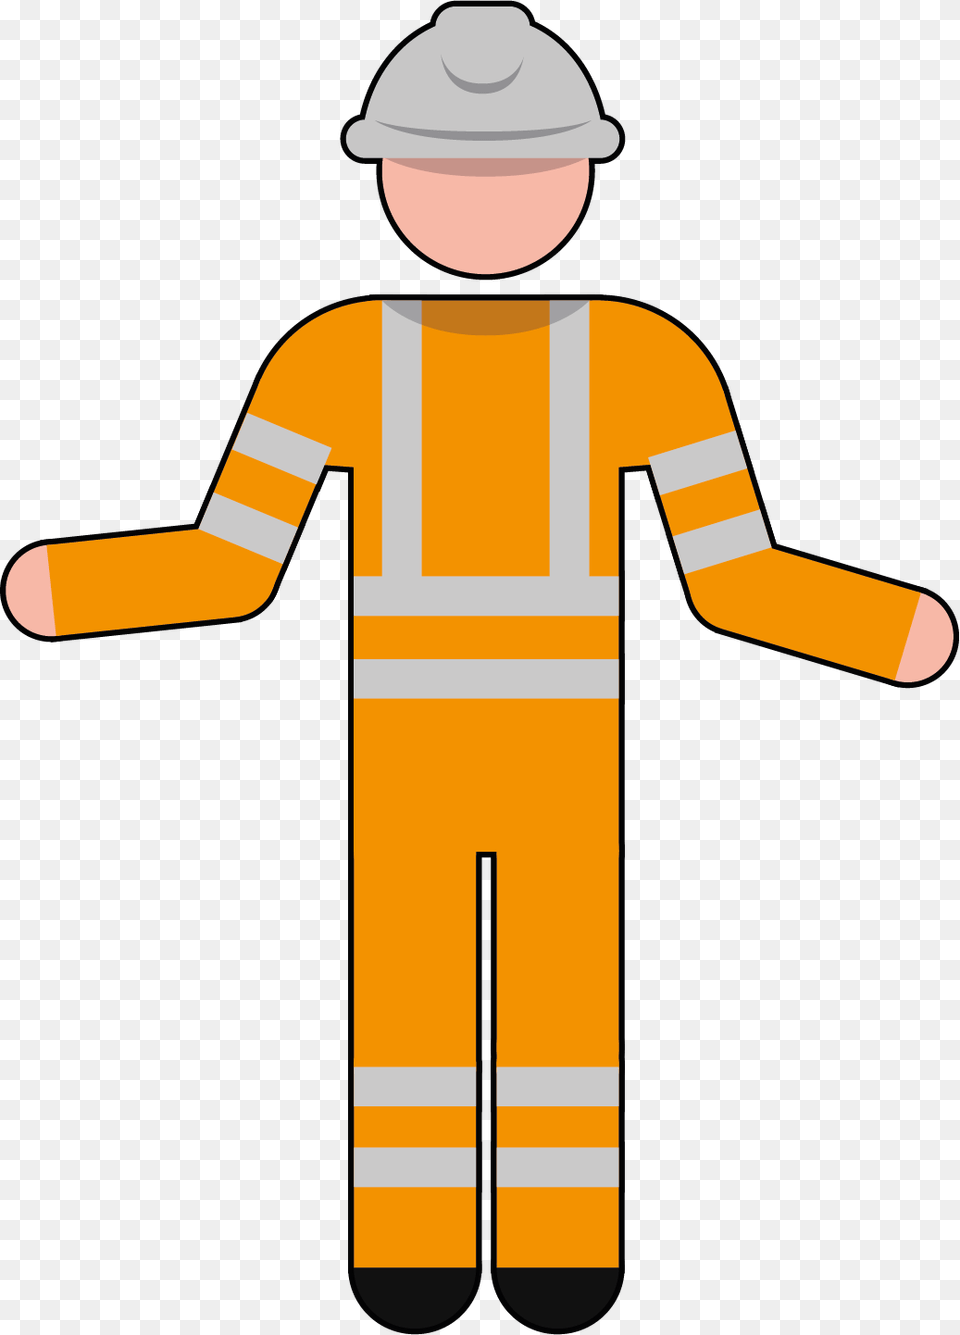 It Is The Responsibility Of The Worker To Ensure That, Clothing, Hardhat, Helmet, Person Png Image